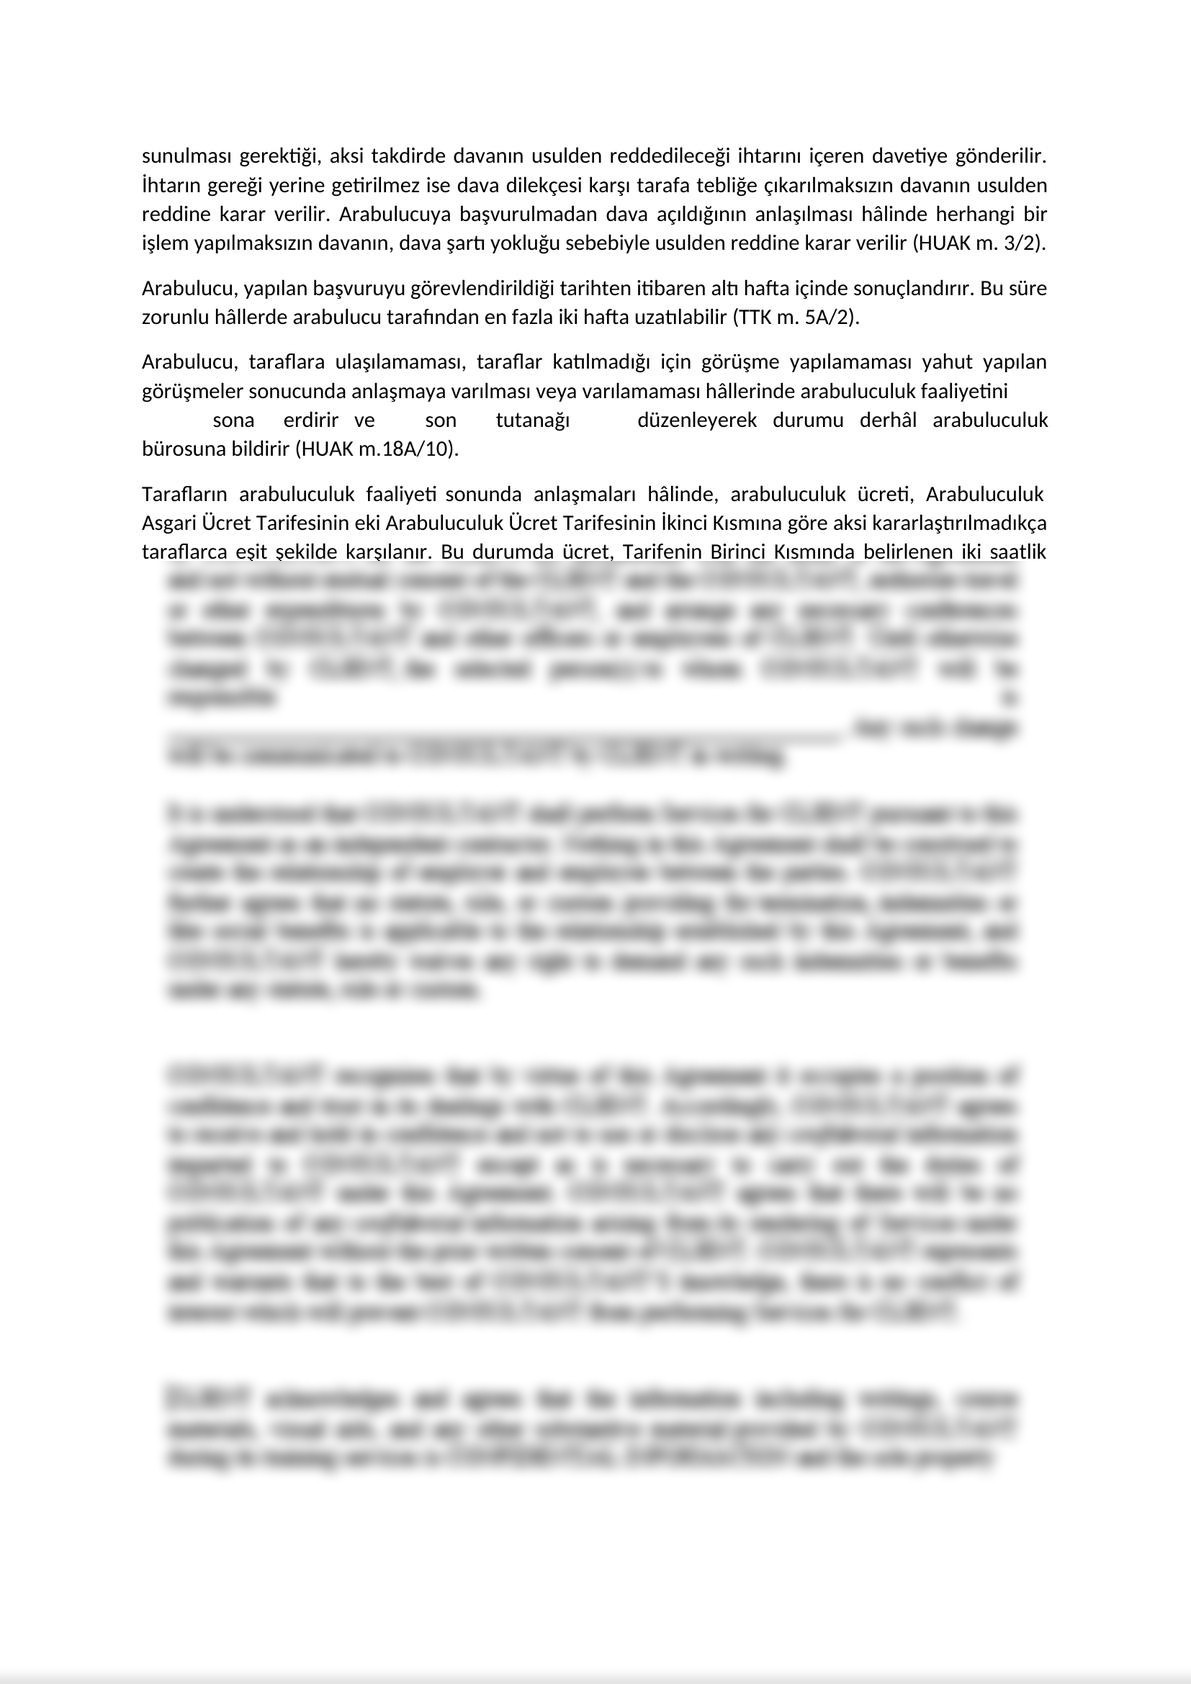 Invitatition Letter to Parties of Mandatory Mediation on Commercial Disputes - Turkish -1